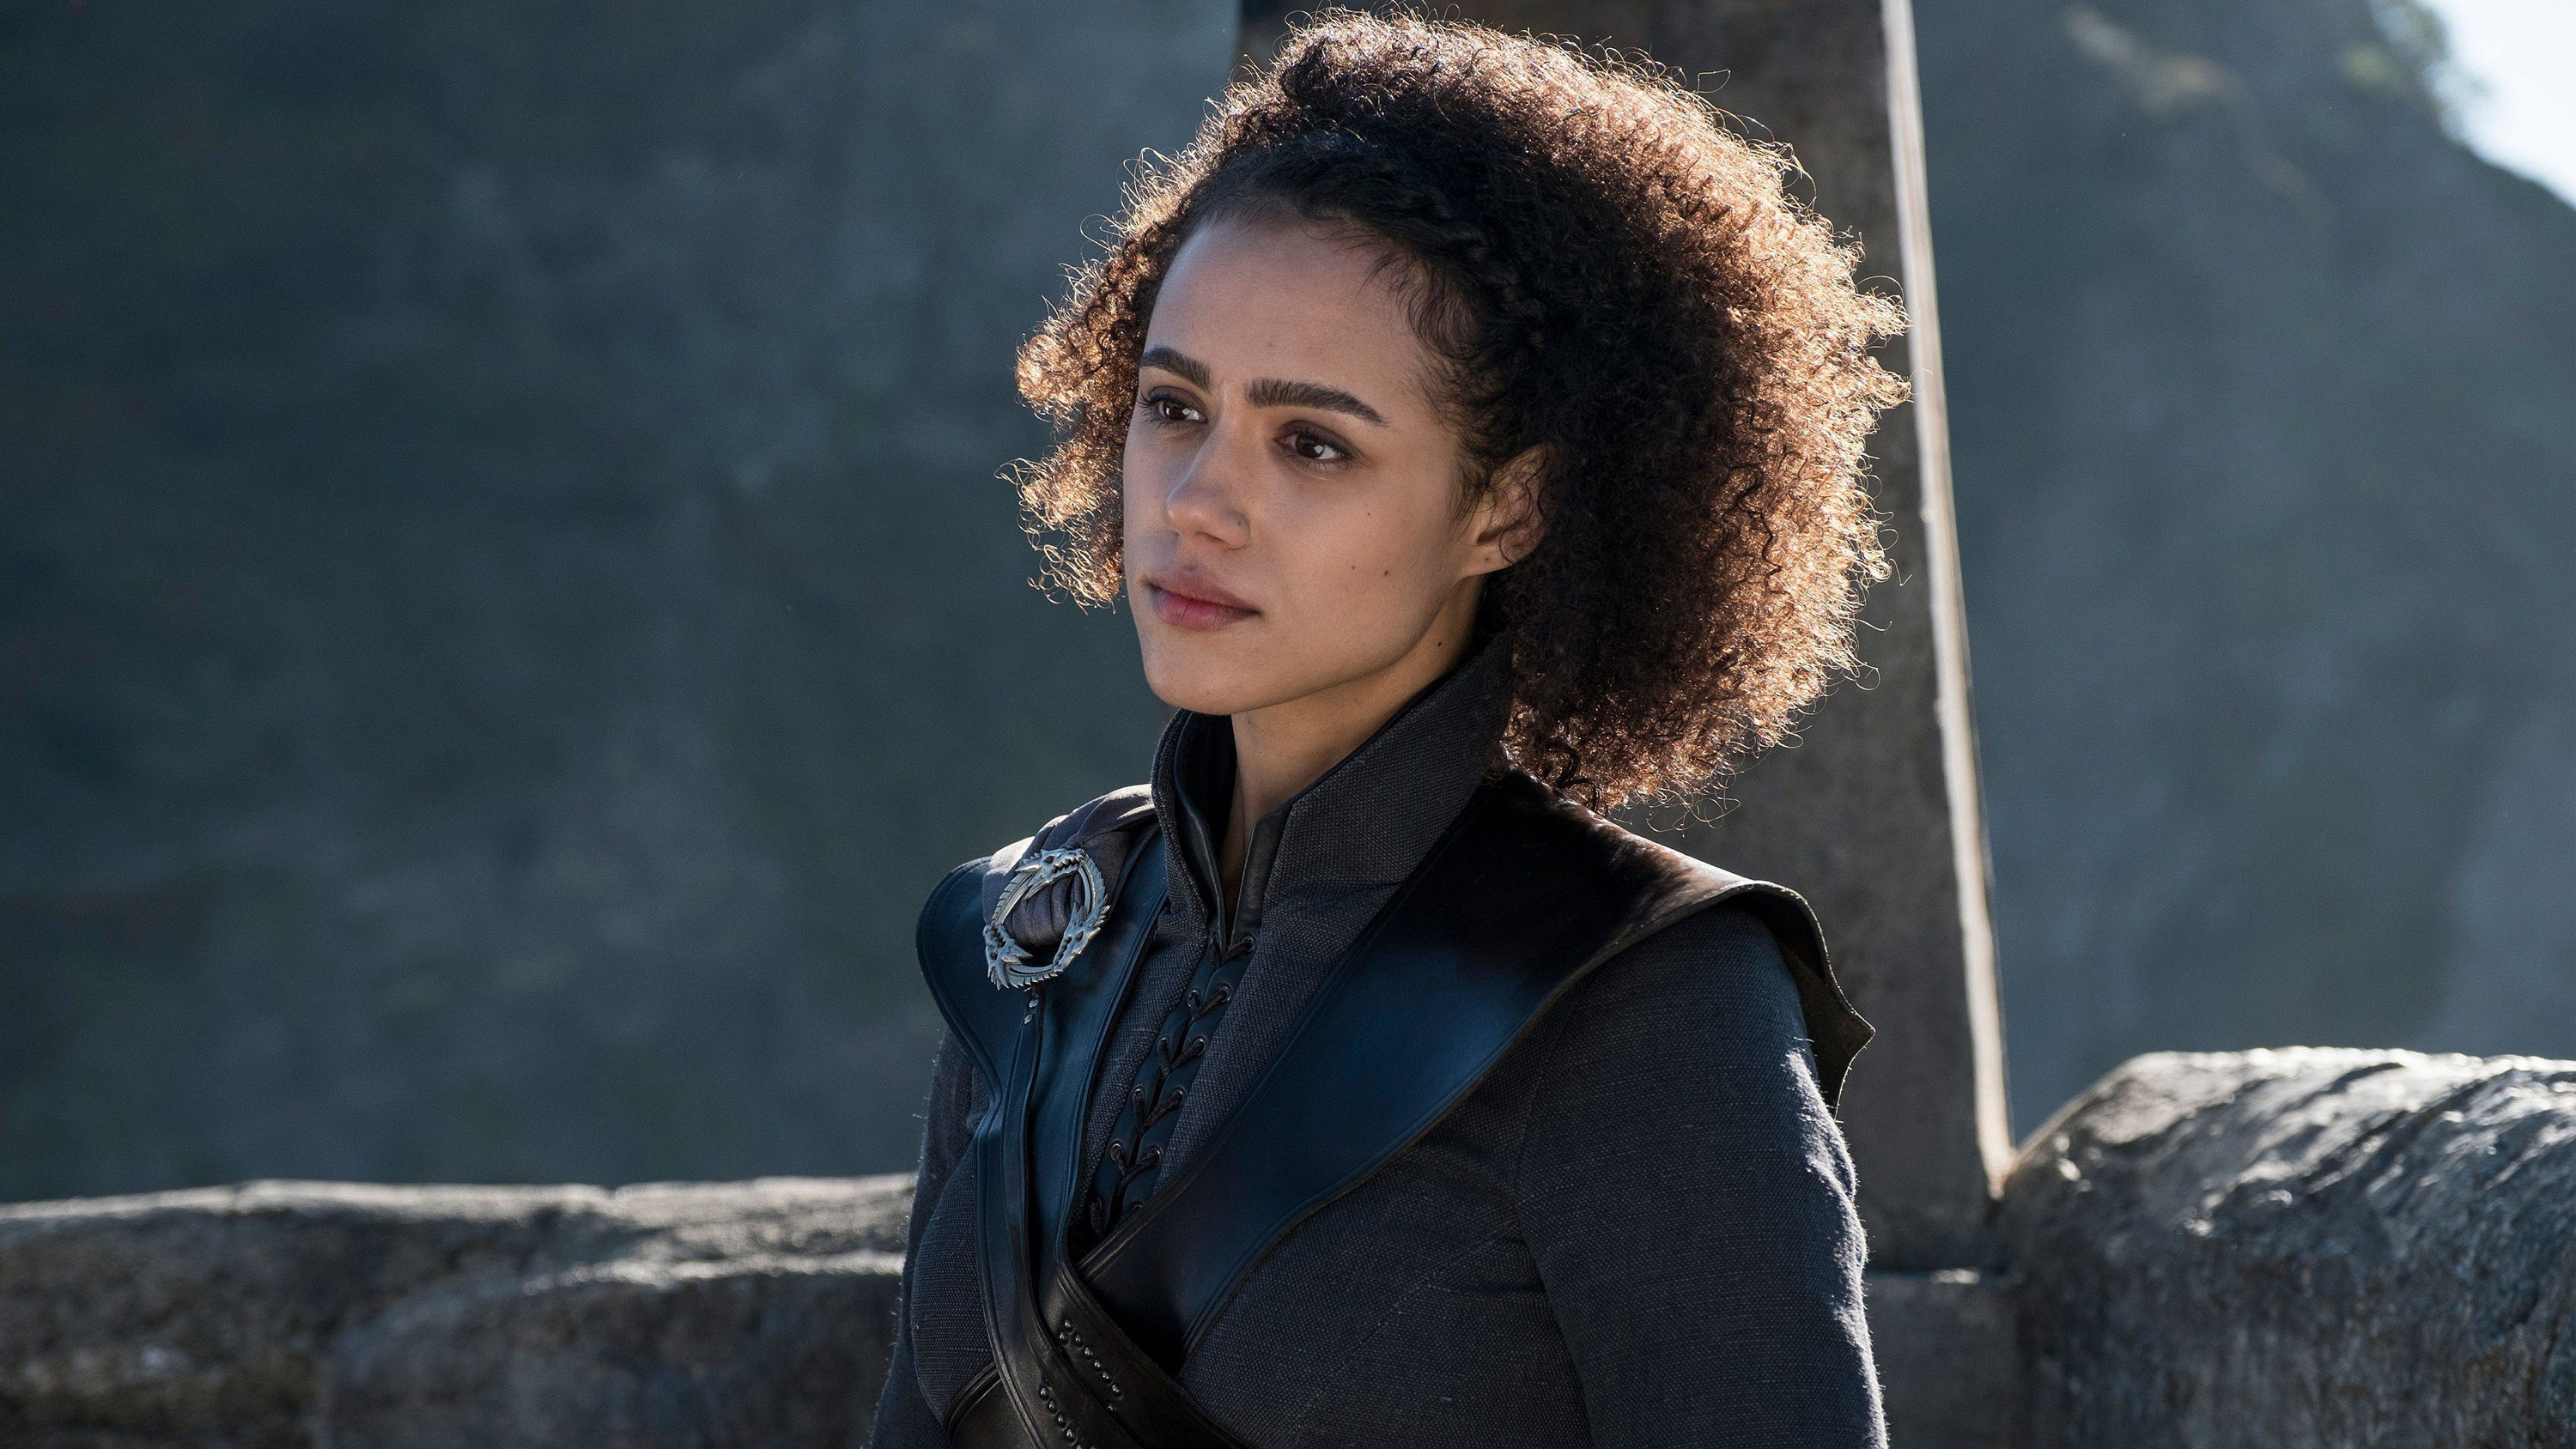 Nathalie Emmanuel as Missandei in &quot;Game of Thrones&quot;